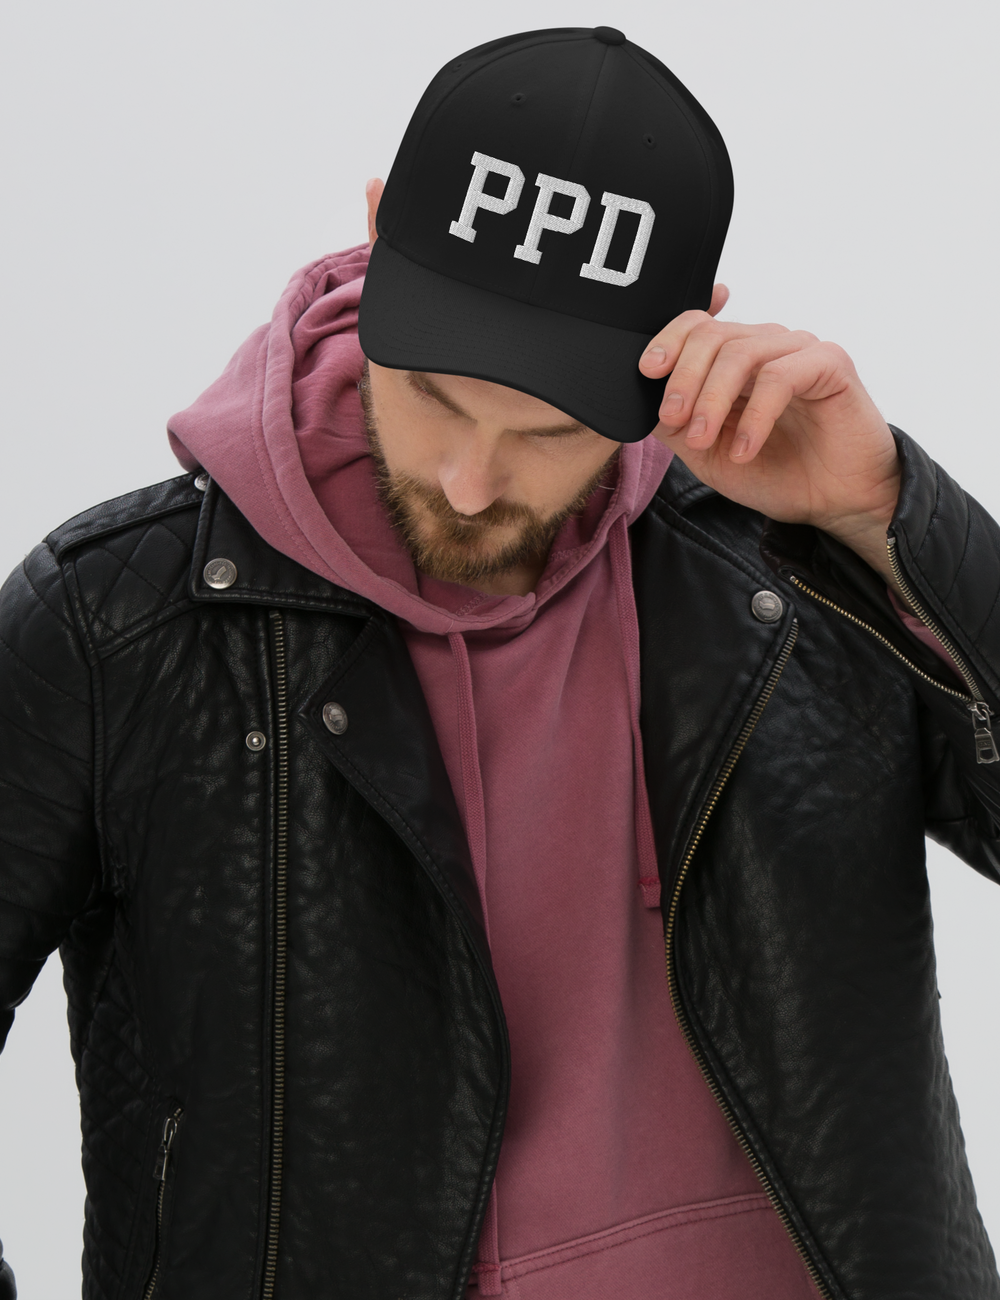 PPD (Front Only) Closed Back Flexfit Hat OniTakai